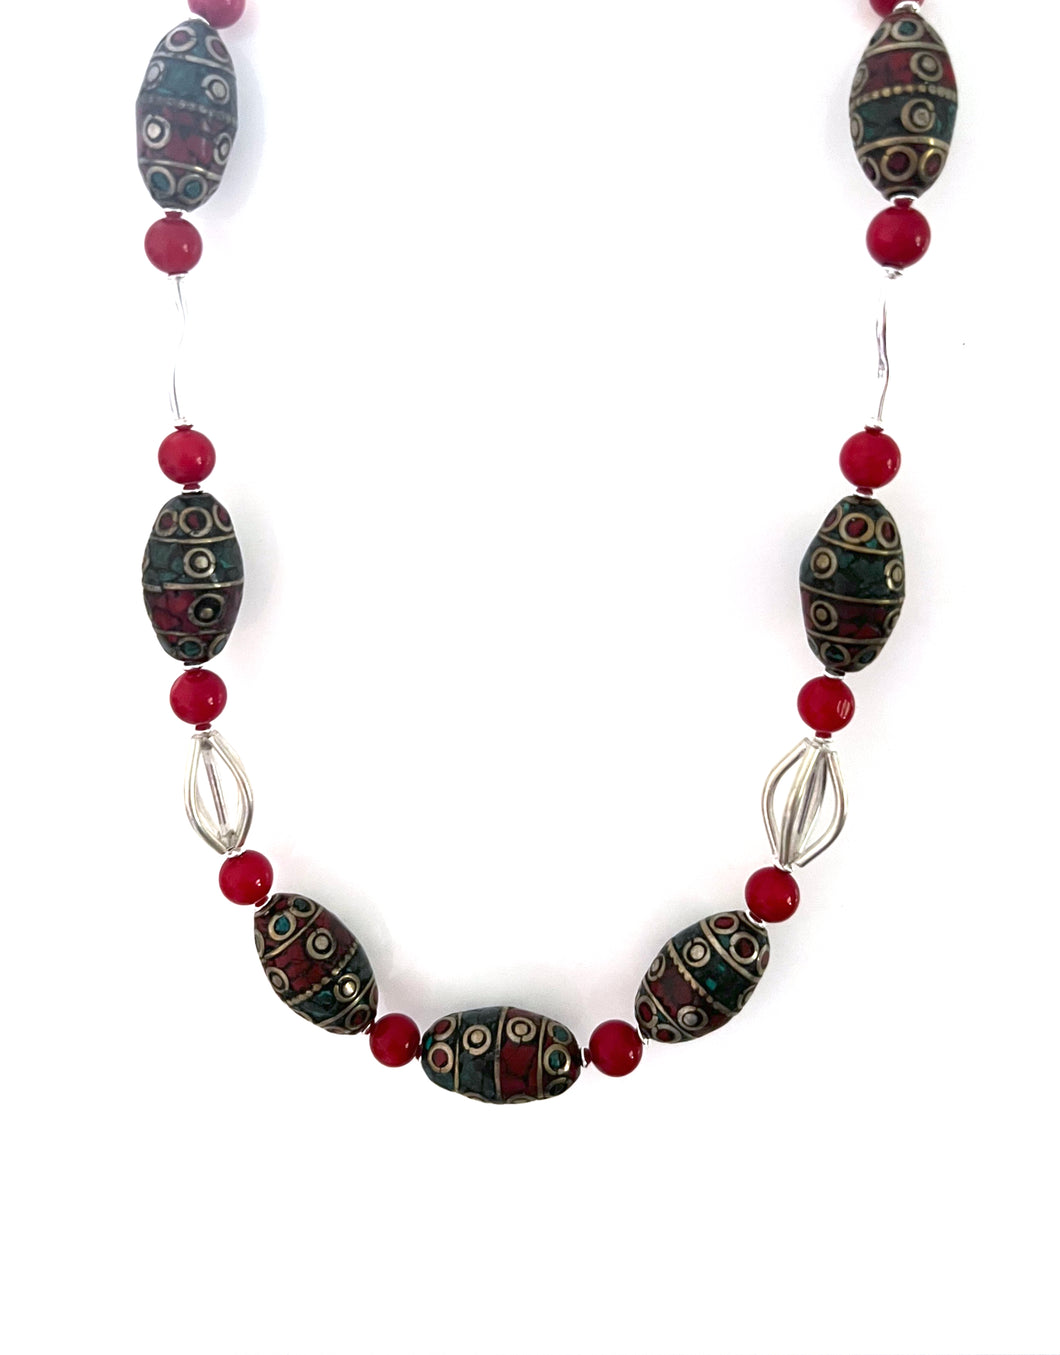 Australian Handmade Red Necklace with Nepalese Beads Coral and Sterling Silver